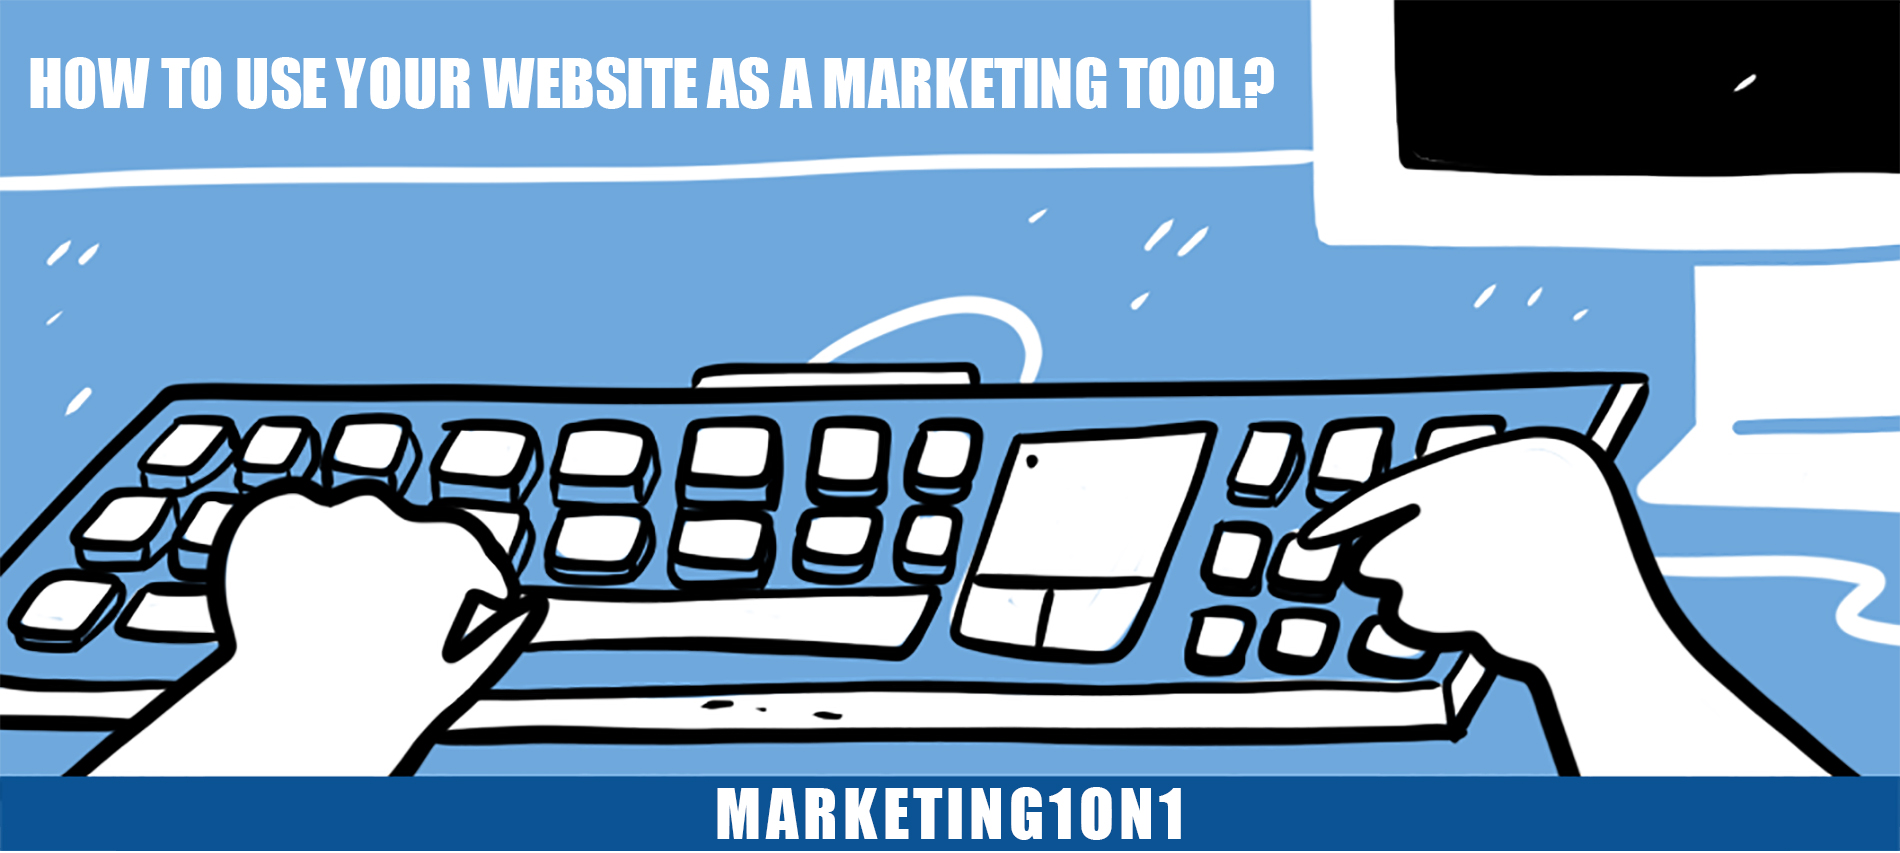 How to use your website as a marketing tool?